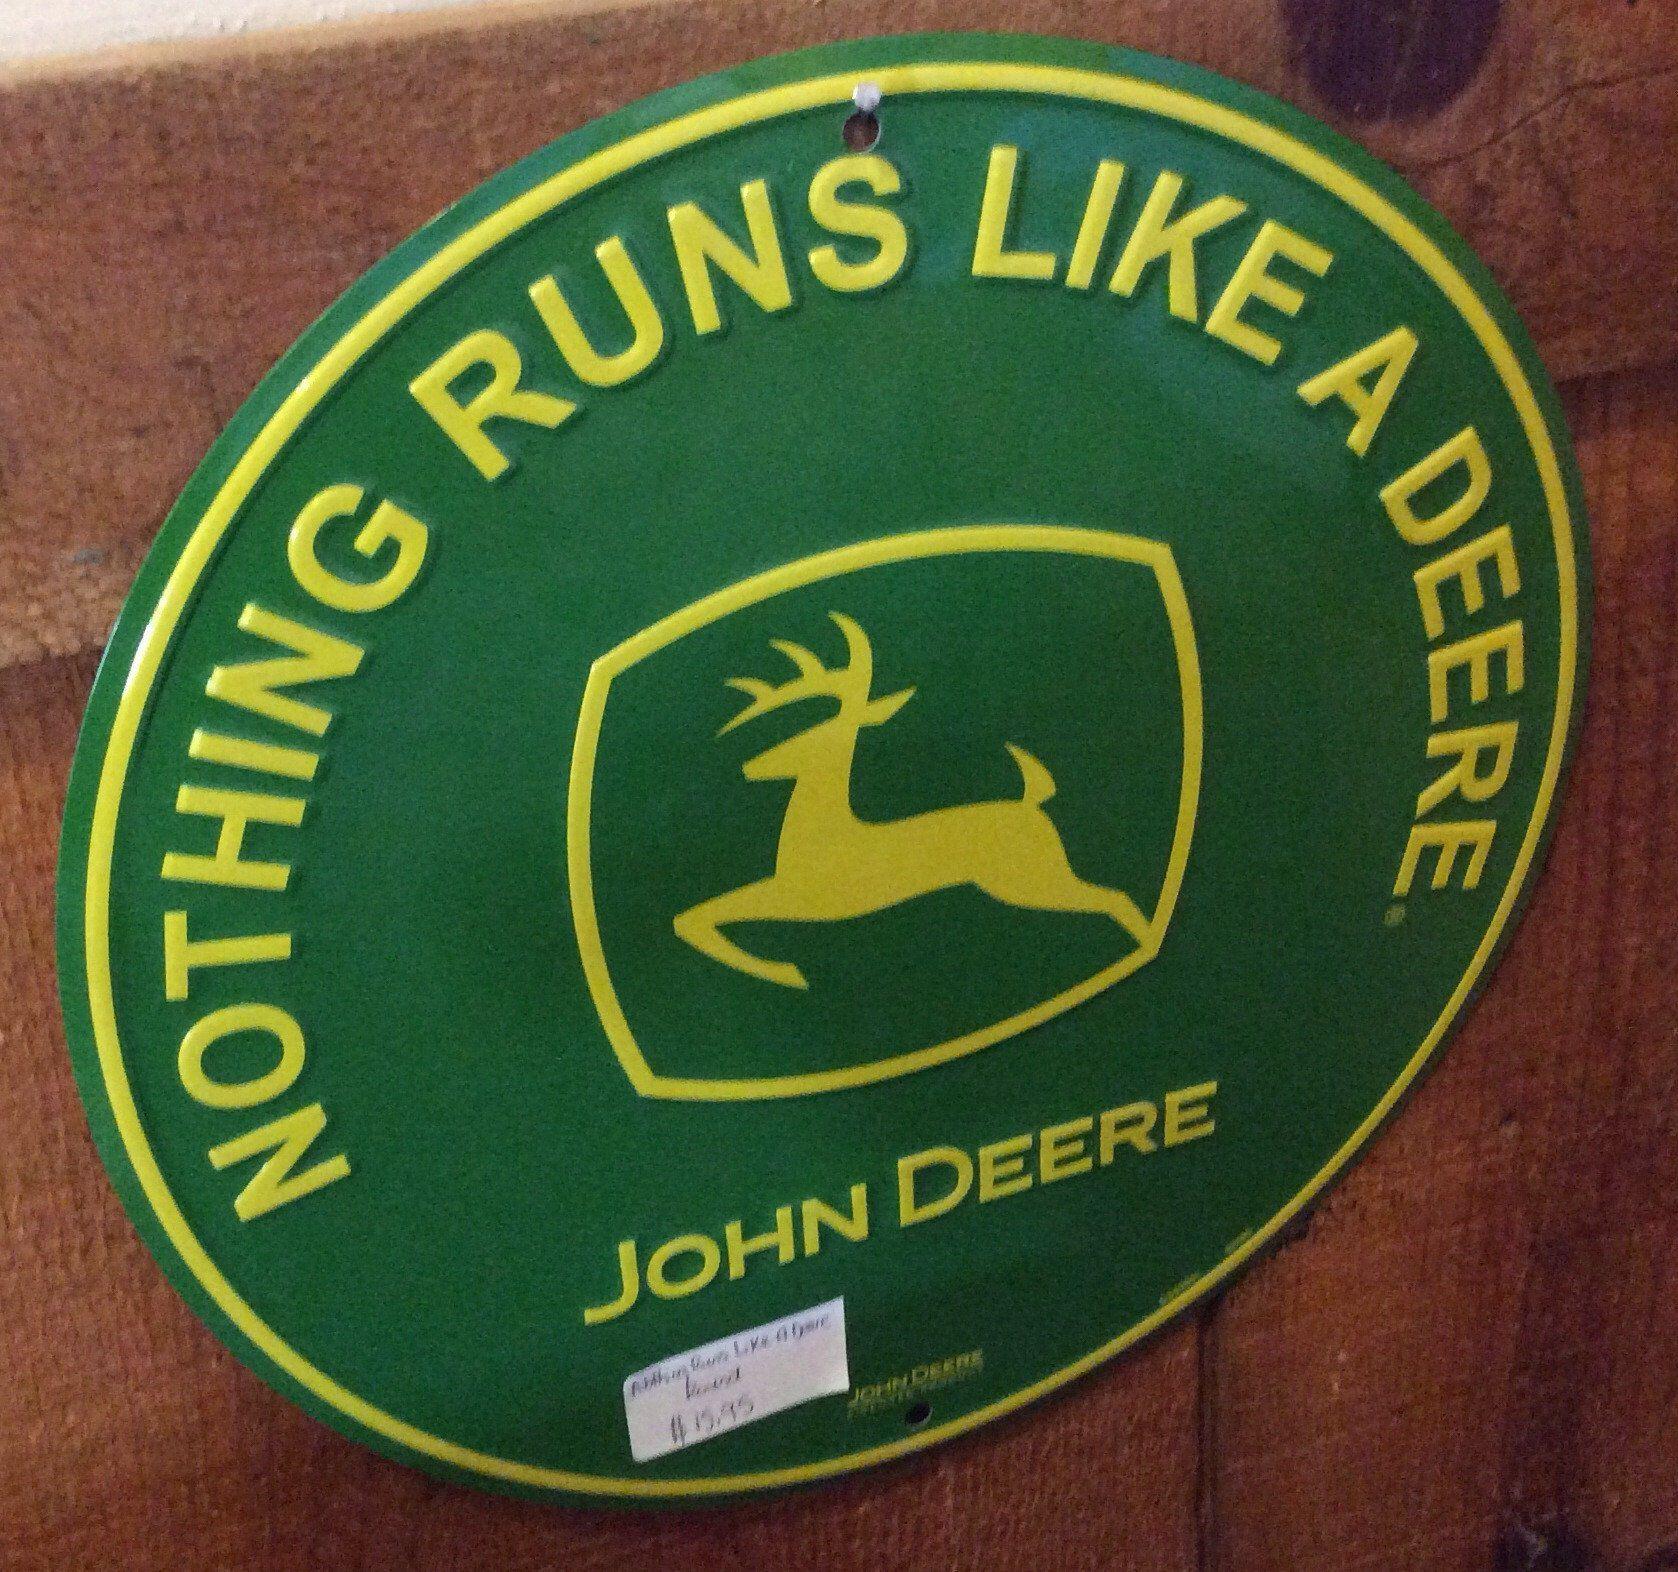 Nothing Runs Like a Deere Logo - Nothing Runs Like a Deere- Tin Sign Round Barn Company Store